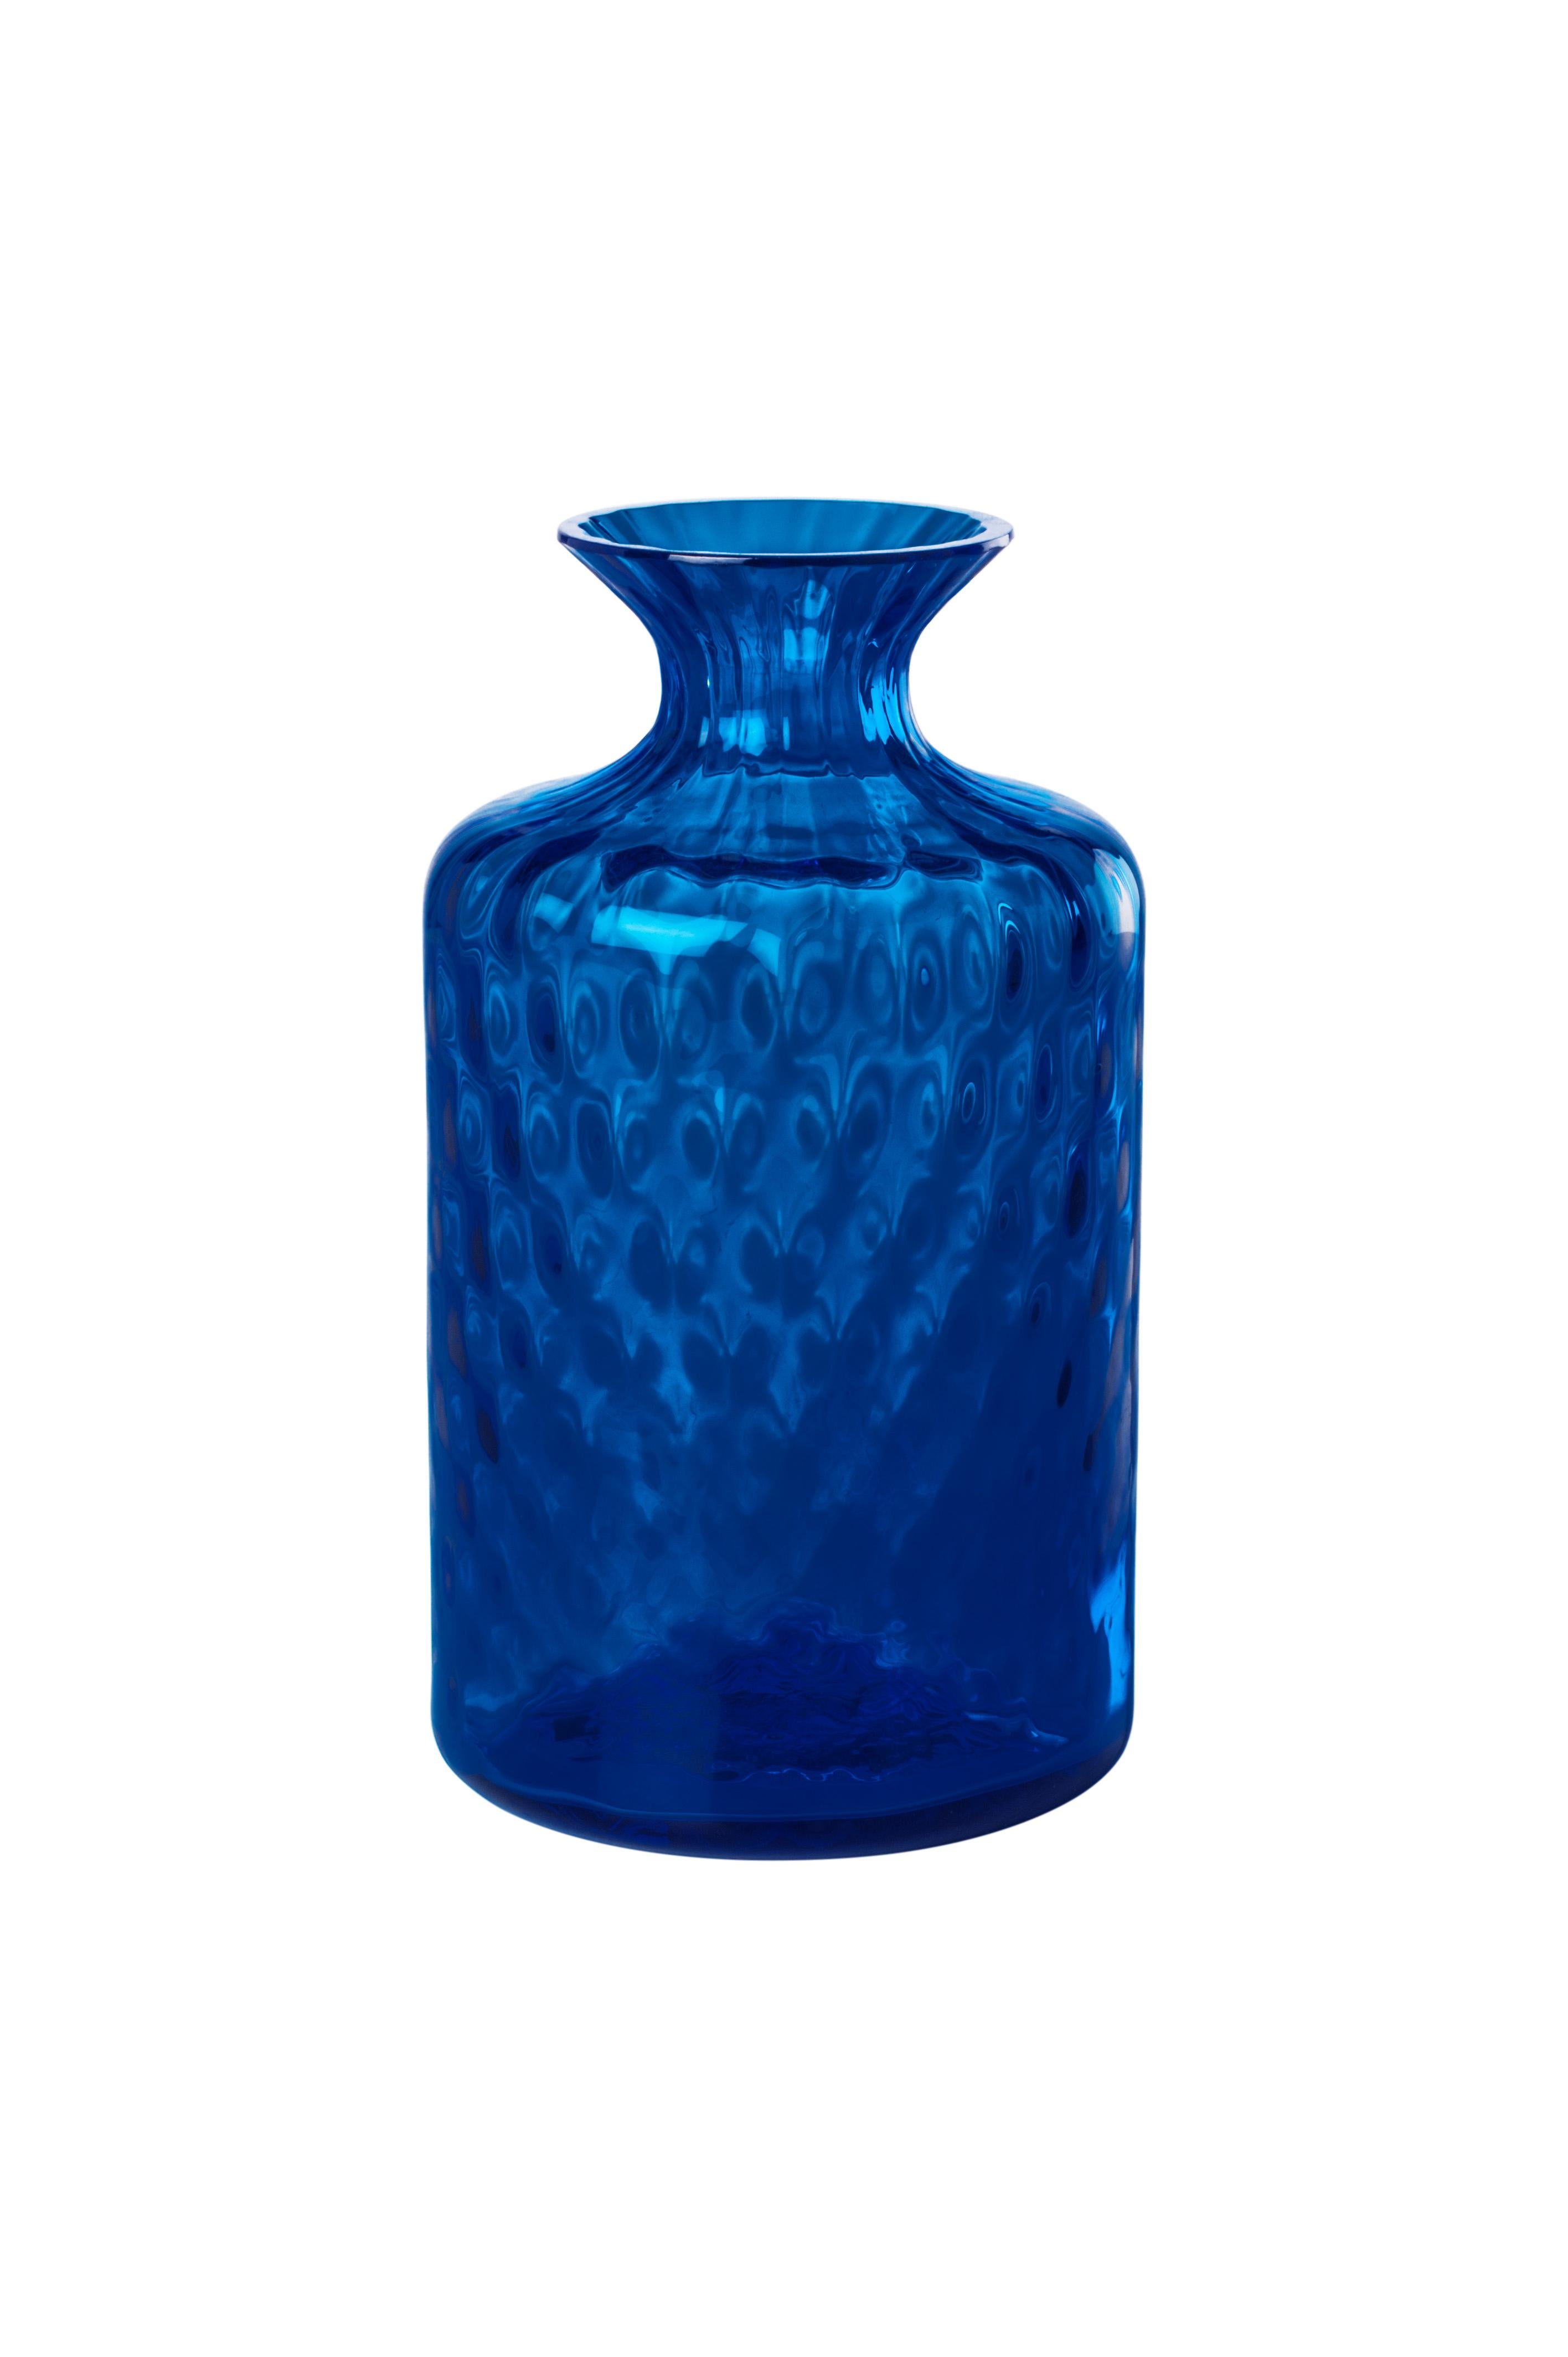 Venini glass vase with full body and thin funneled neck with textured hexagonal shaped pattern atop surface of glass in sapphire. Featured in sapphire colored glass and designed in 2017. Perfect for indoor home decor as container or strong statement